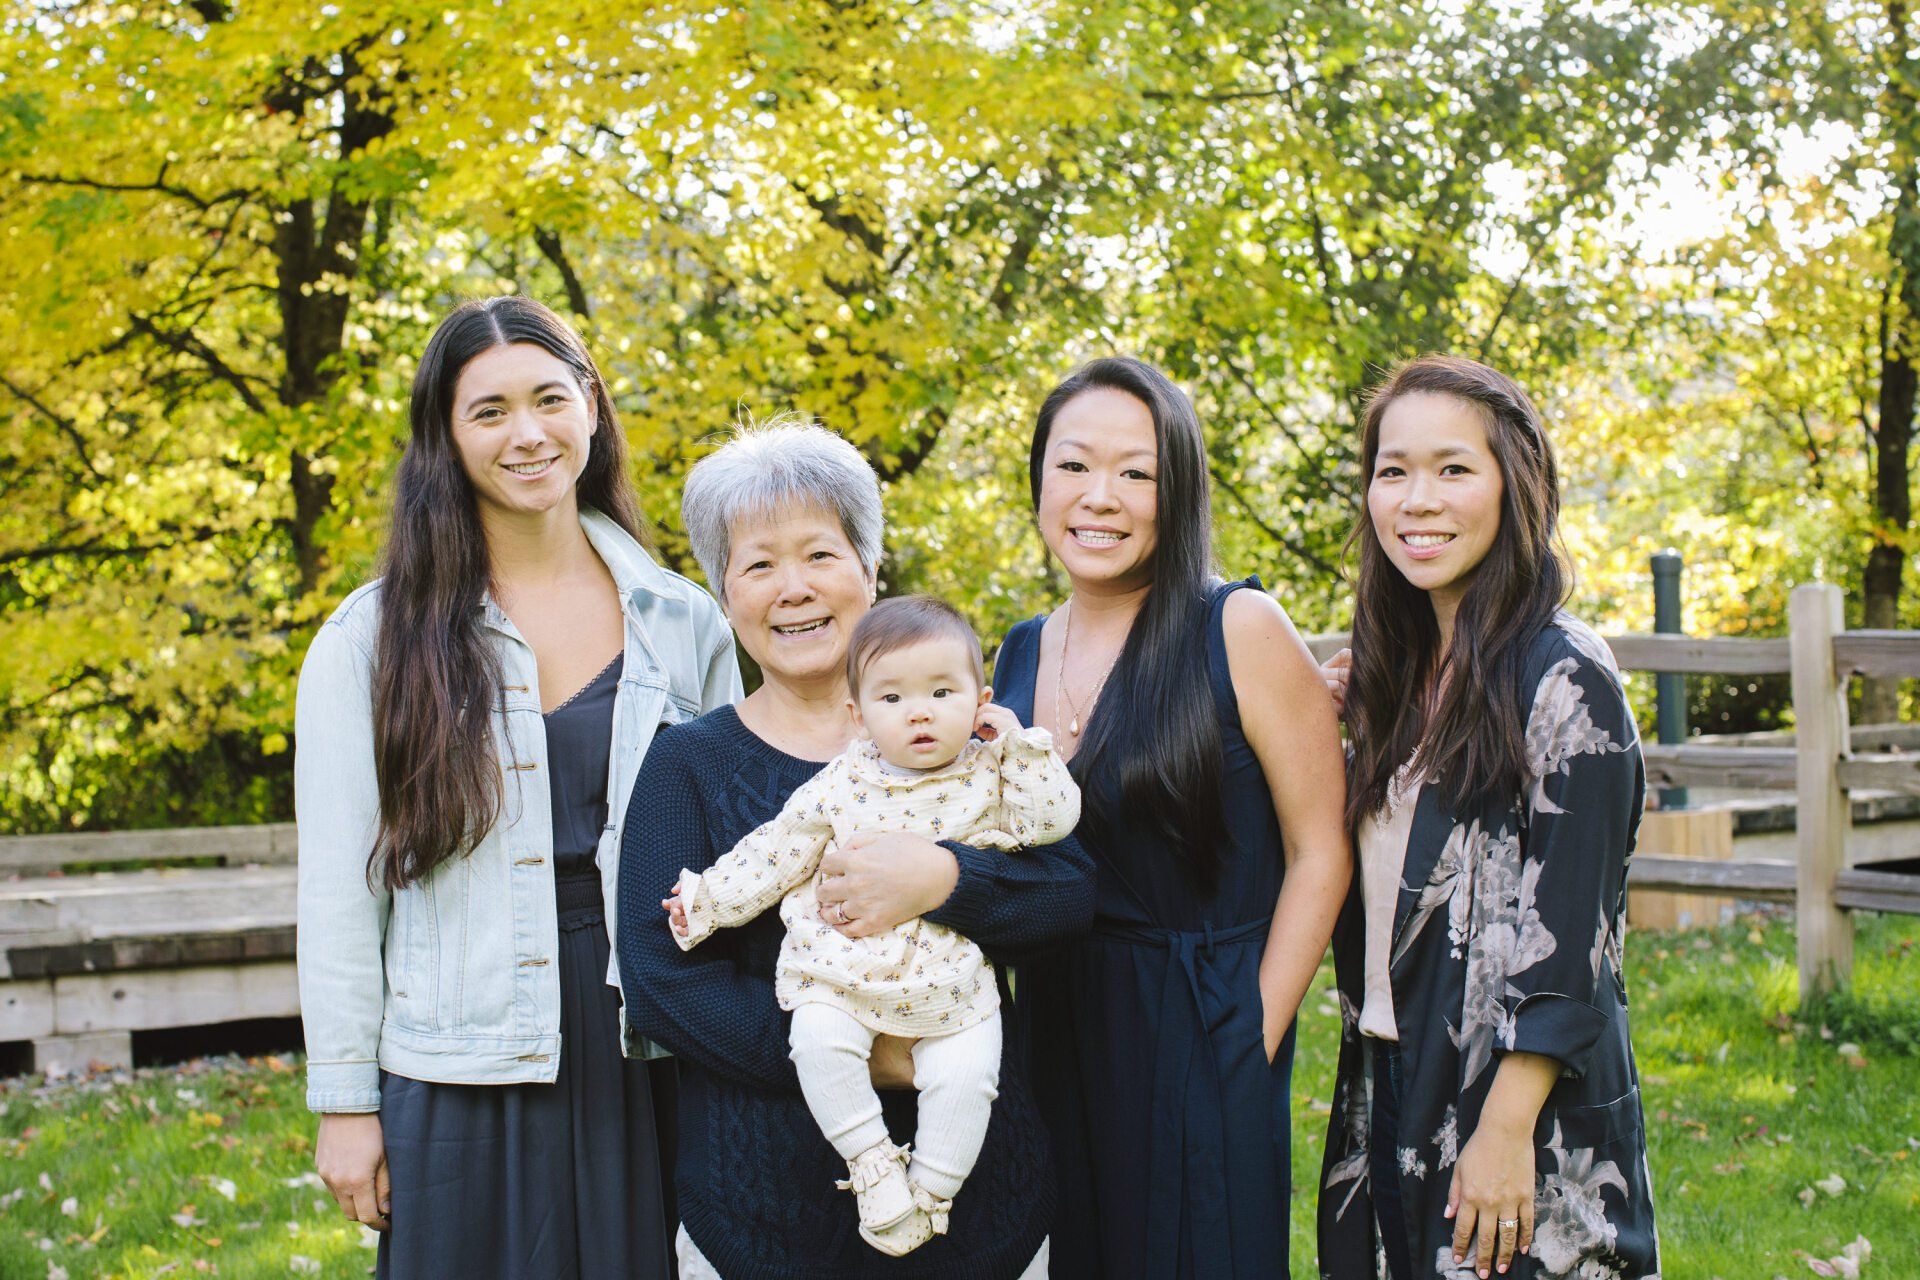 Photo of 3 generations of women in the family